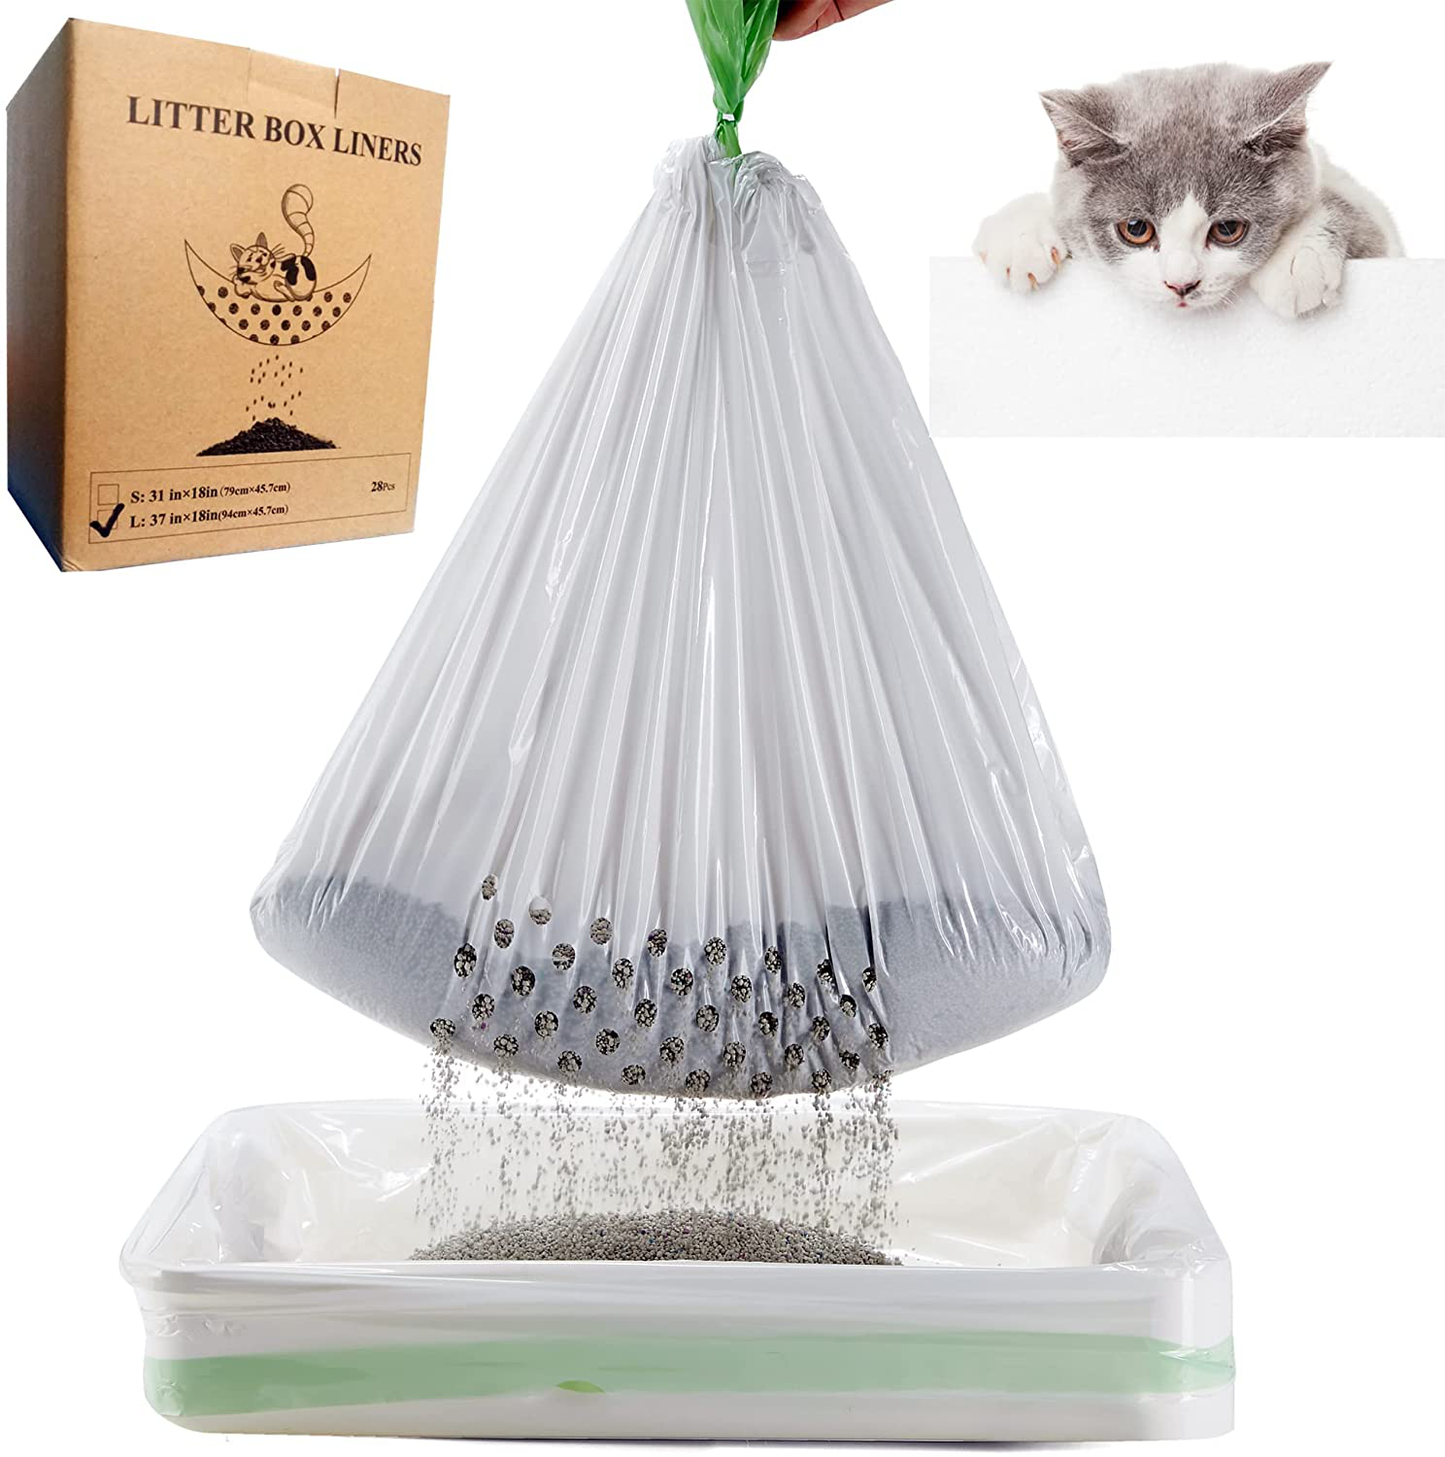 Gefryco Sifting Cat Litter Box Liners Waste Litter Bags for Pet Cats Pan Liners Extra Thick 2 Mil (28 Count - 37" X 18") Animals & Pet Supplies > Pet Supplies > Cat Supplies > Cat Litter Box Liners Gefryco 28 Count - 37" x 18"  